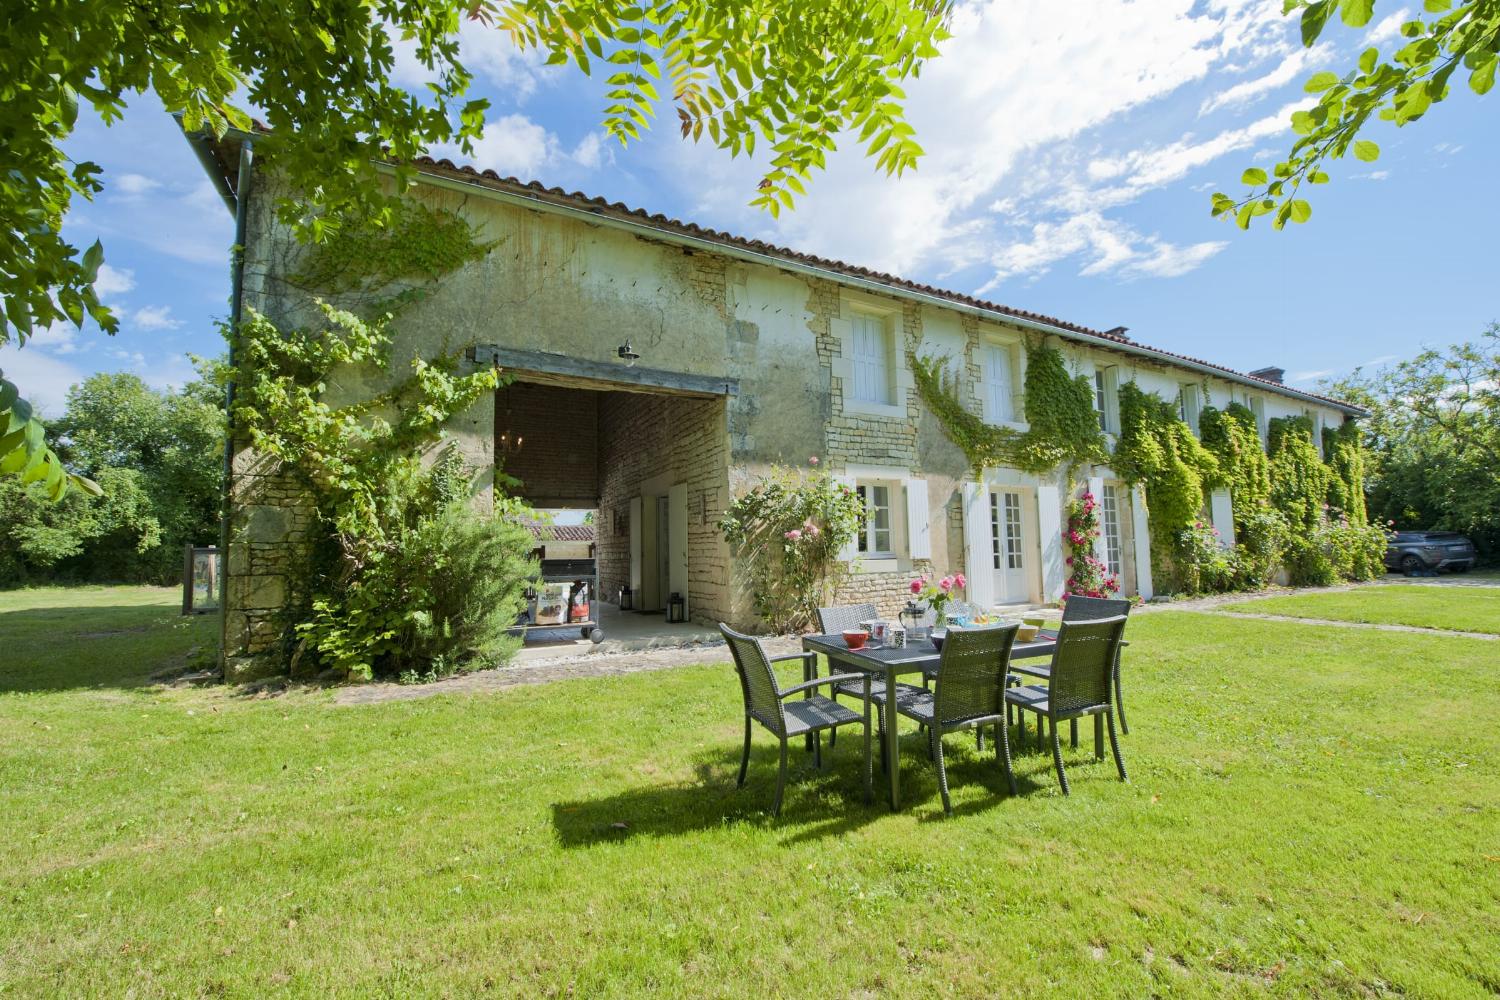 Rental accommodation in Charente